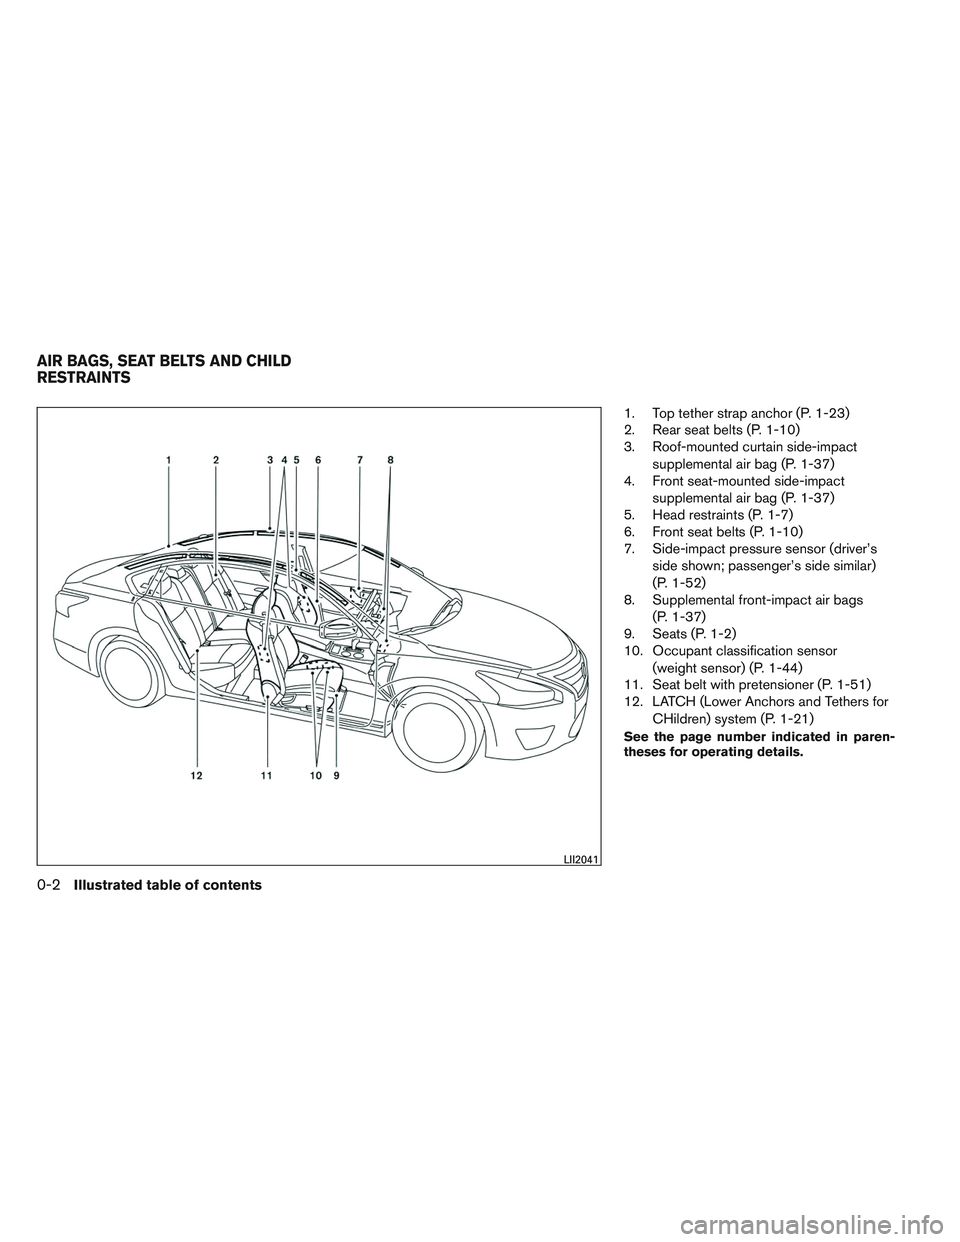 NISSAN ALTIMA SEDAN 2013  Owners Manual 1. Top tether strap anchor (P. 1-23)
2. Rear seat belts (P. 1-10)
3. Roof-mounted curtain side-impactsupplemental air bag (P. 1-37)
4. Front seat-mounted side-impact
supplemental air bag (P. 1-37)
5. 